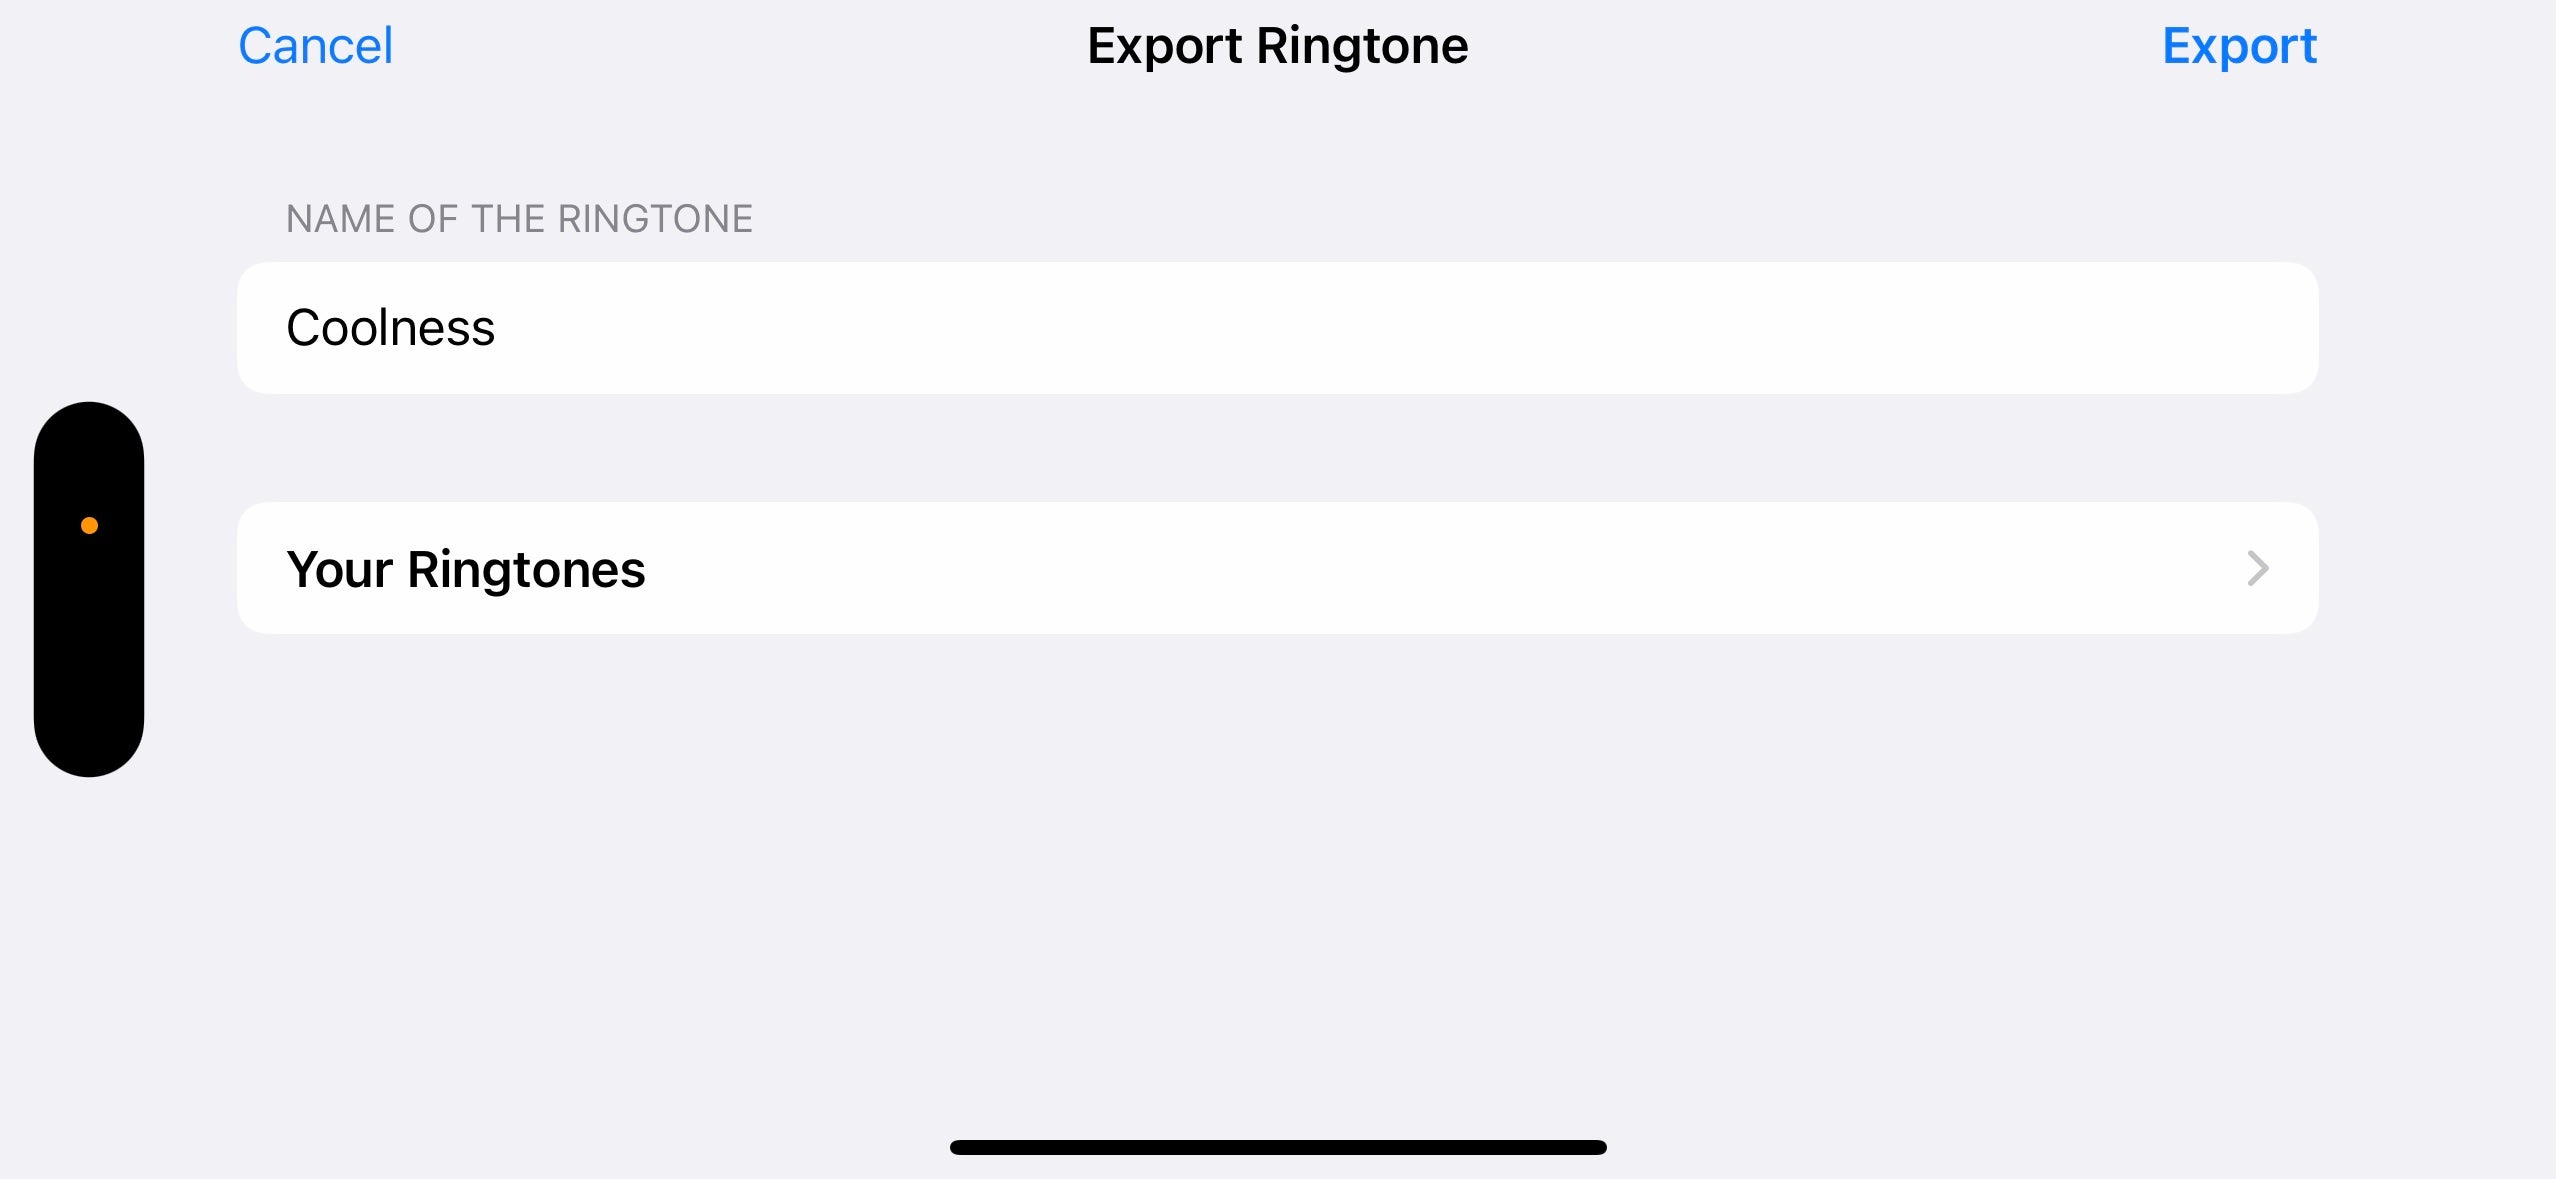 Naming your ringtone before exporting